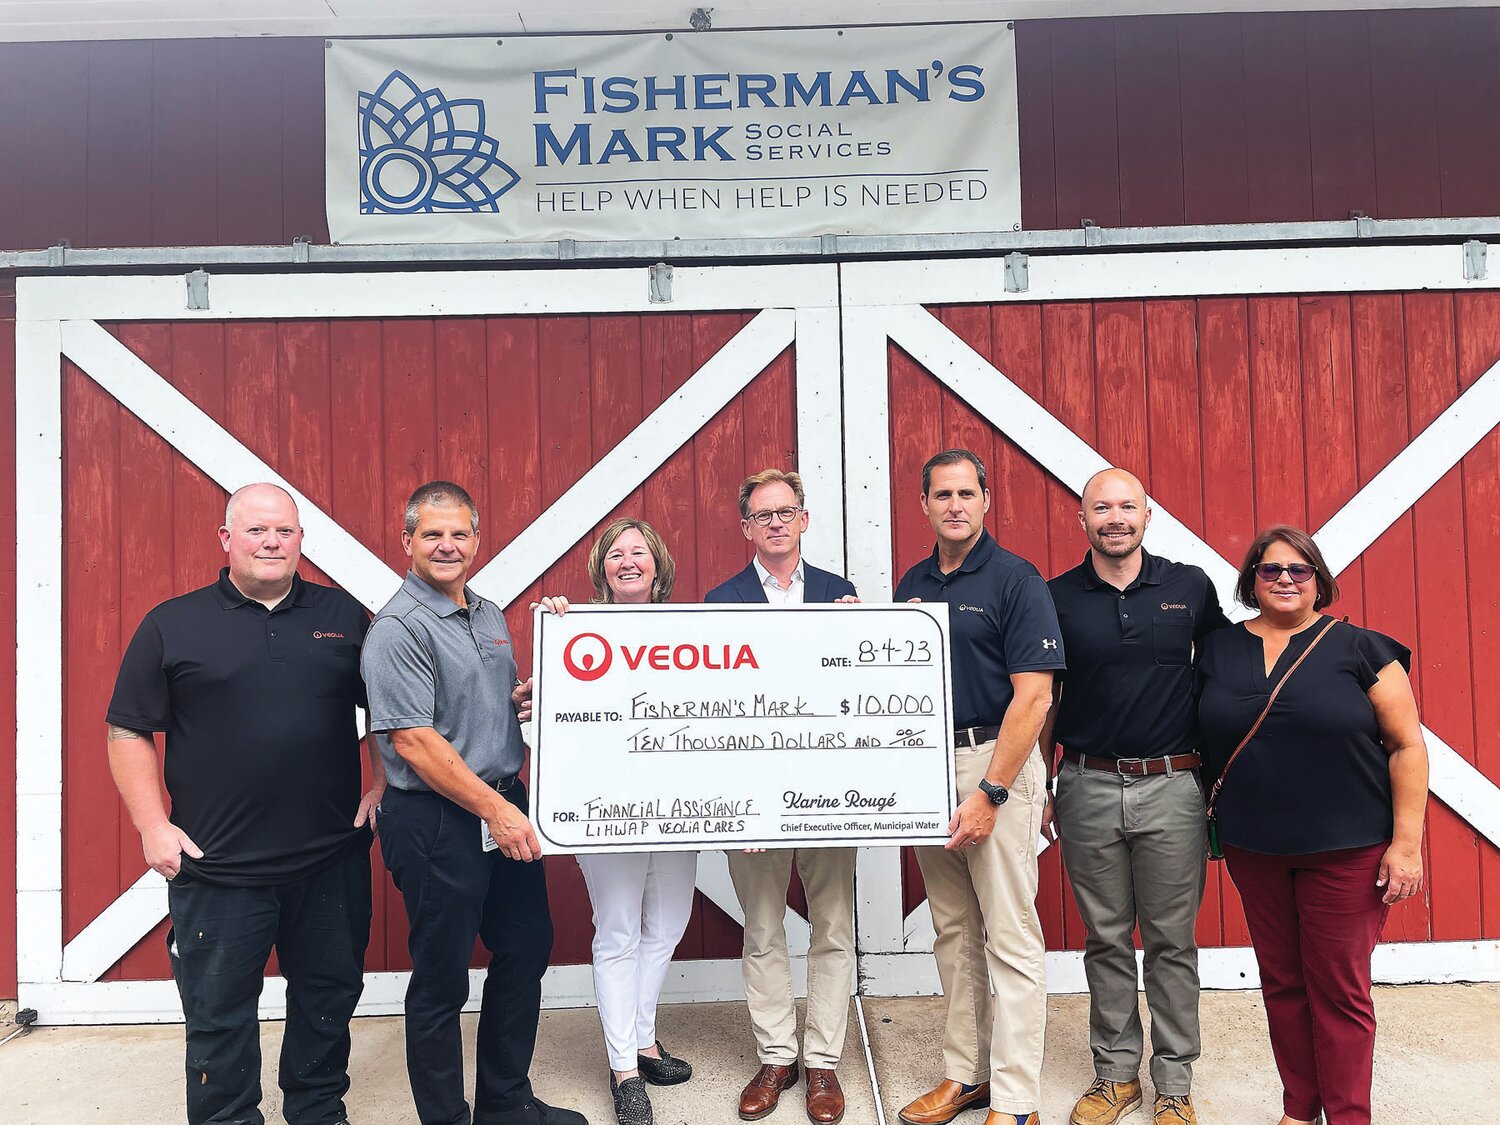 Veolia Water presents Jennifer Williford, executive director of Fisherman's Mark, center, and Lambertville Mayor Andrew Nowick,center, with a $10,000 check.